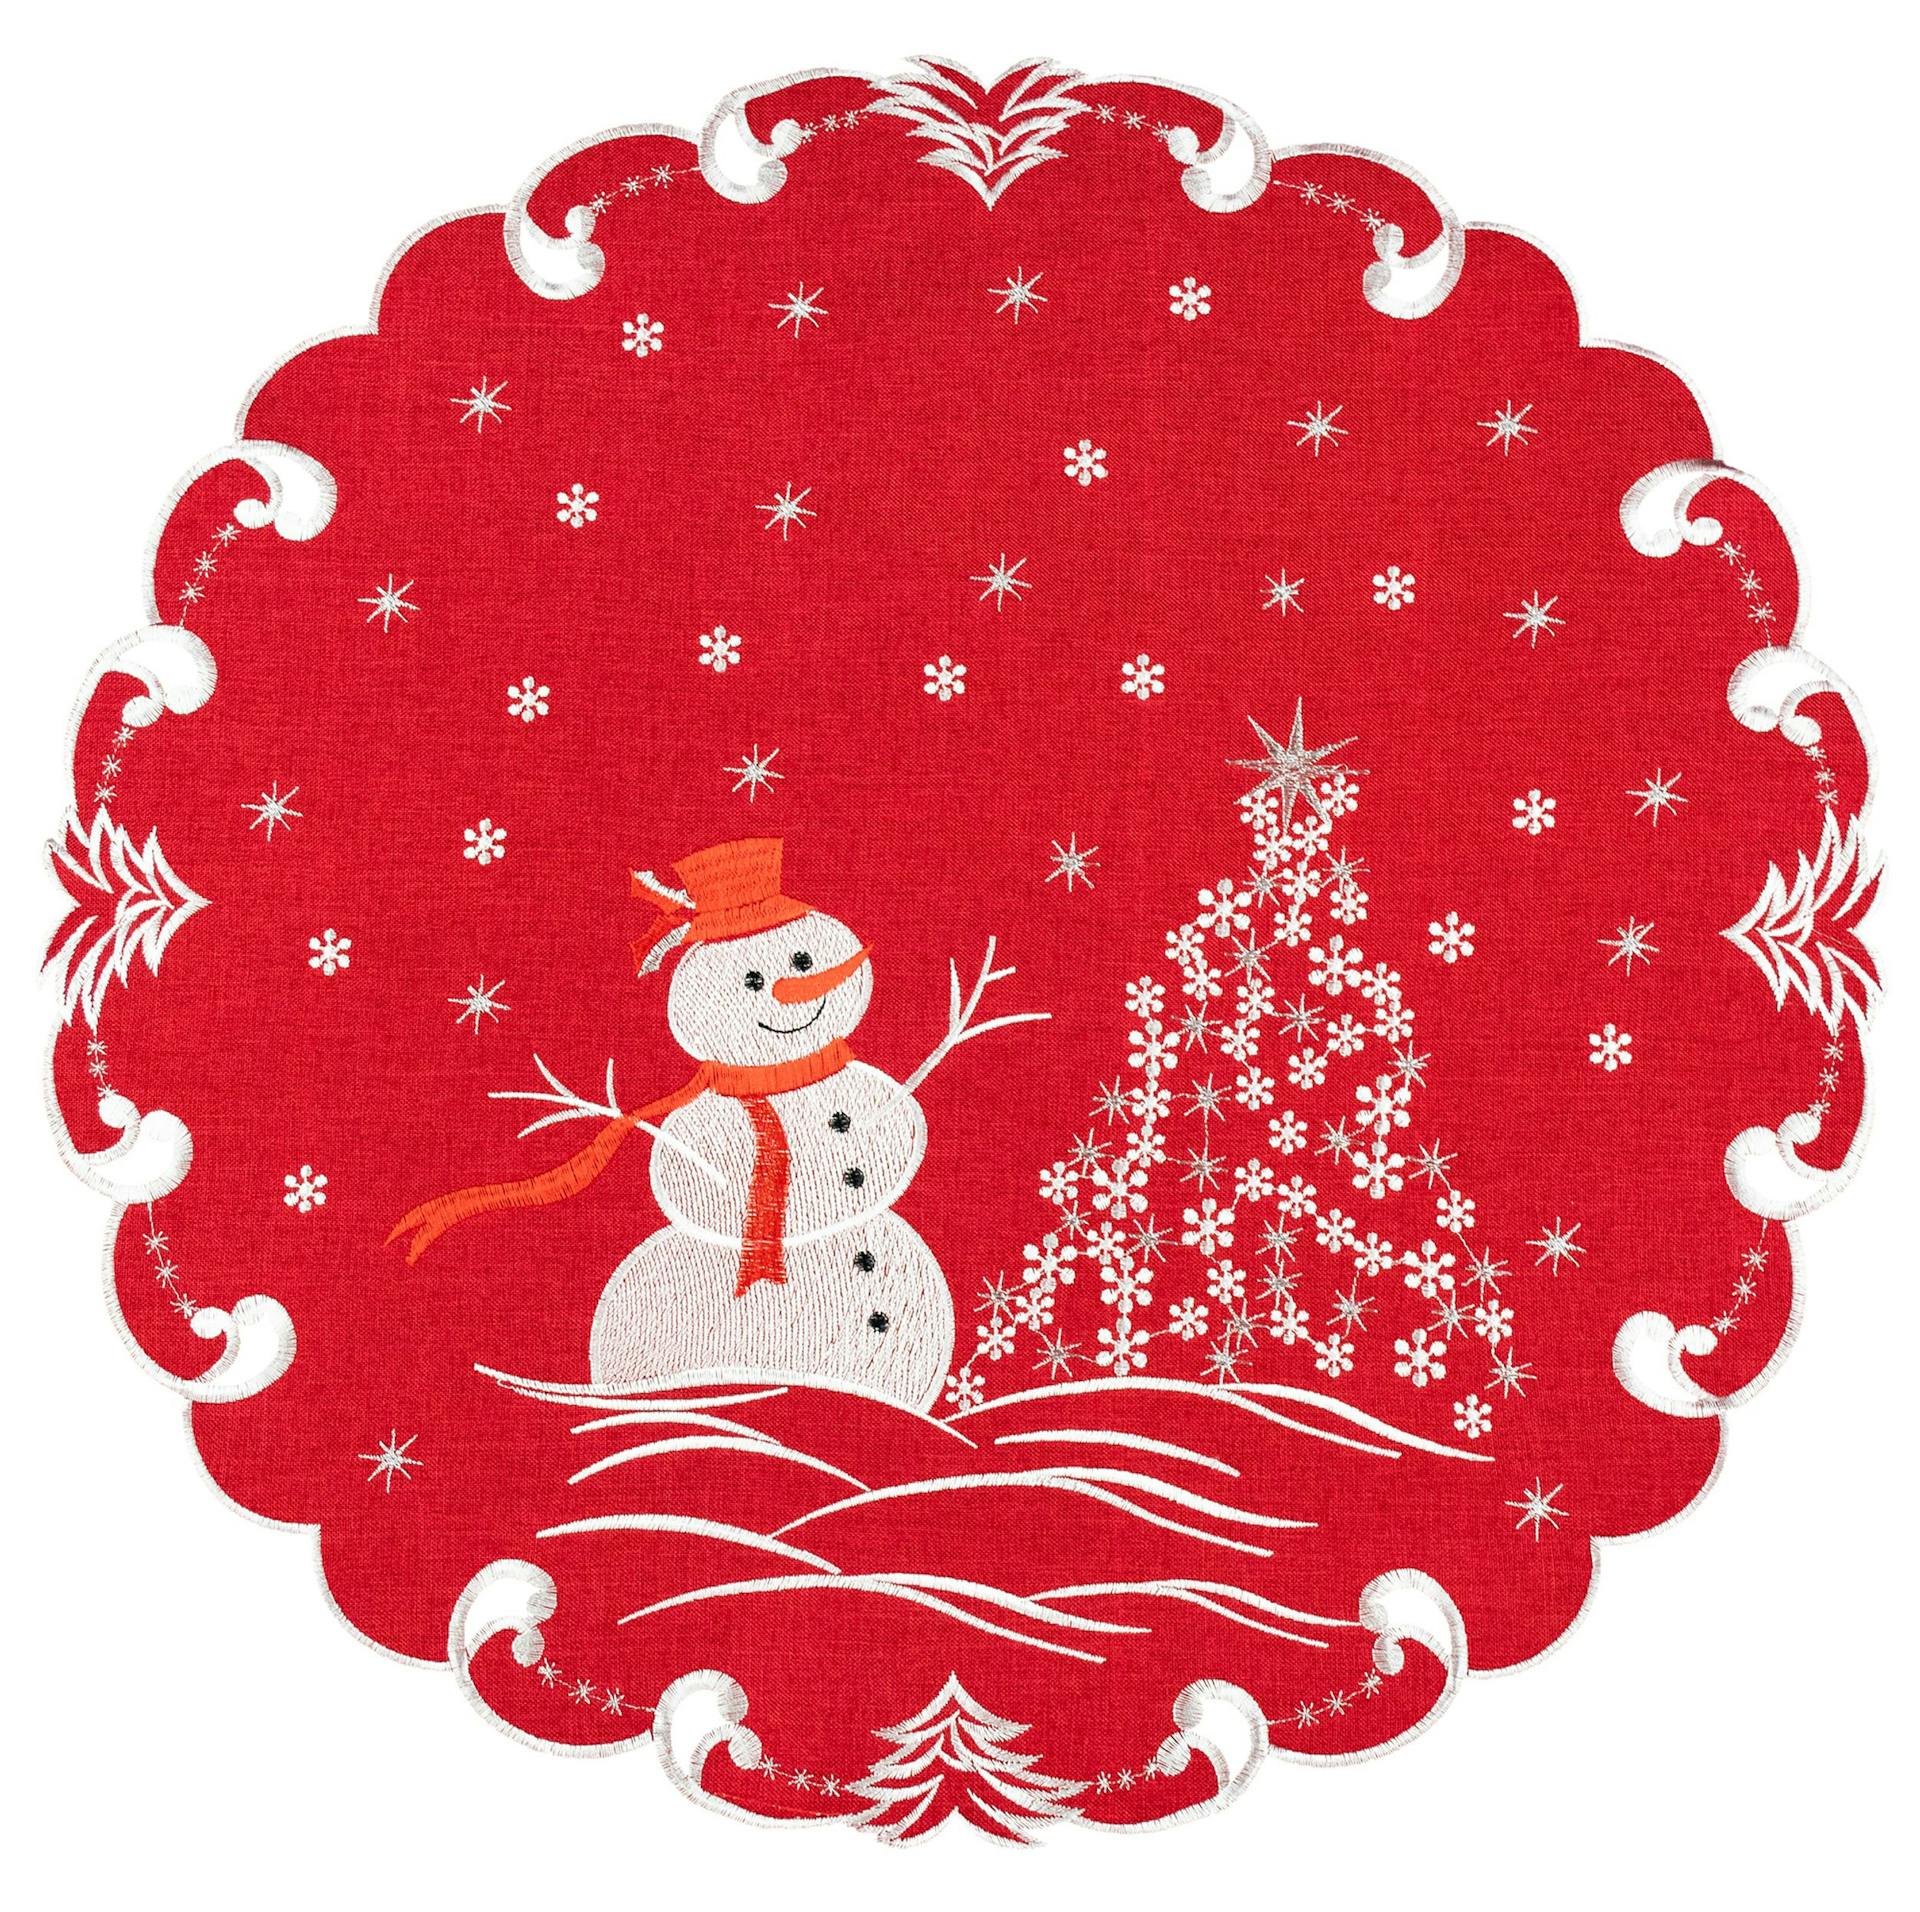 Snowman with Snowflakes Trees Topper (23" Round / 33" Round / 33" Square)